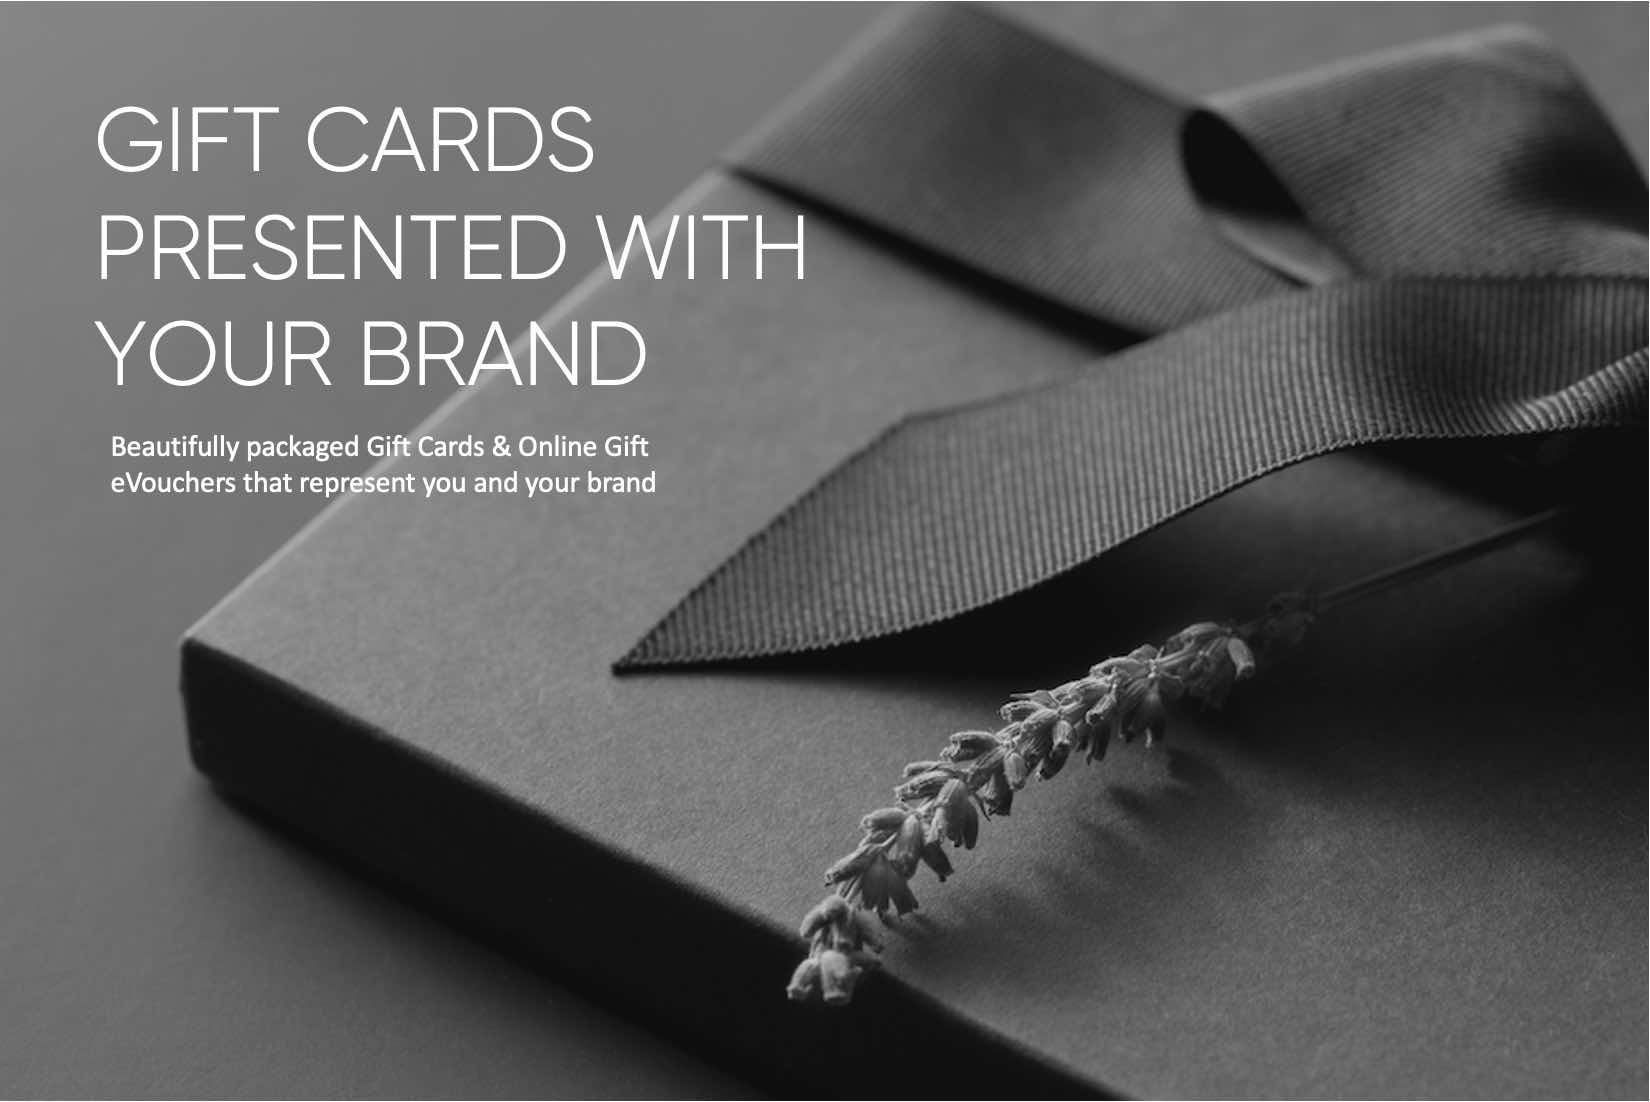 Gift cards for your brand